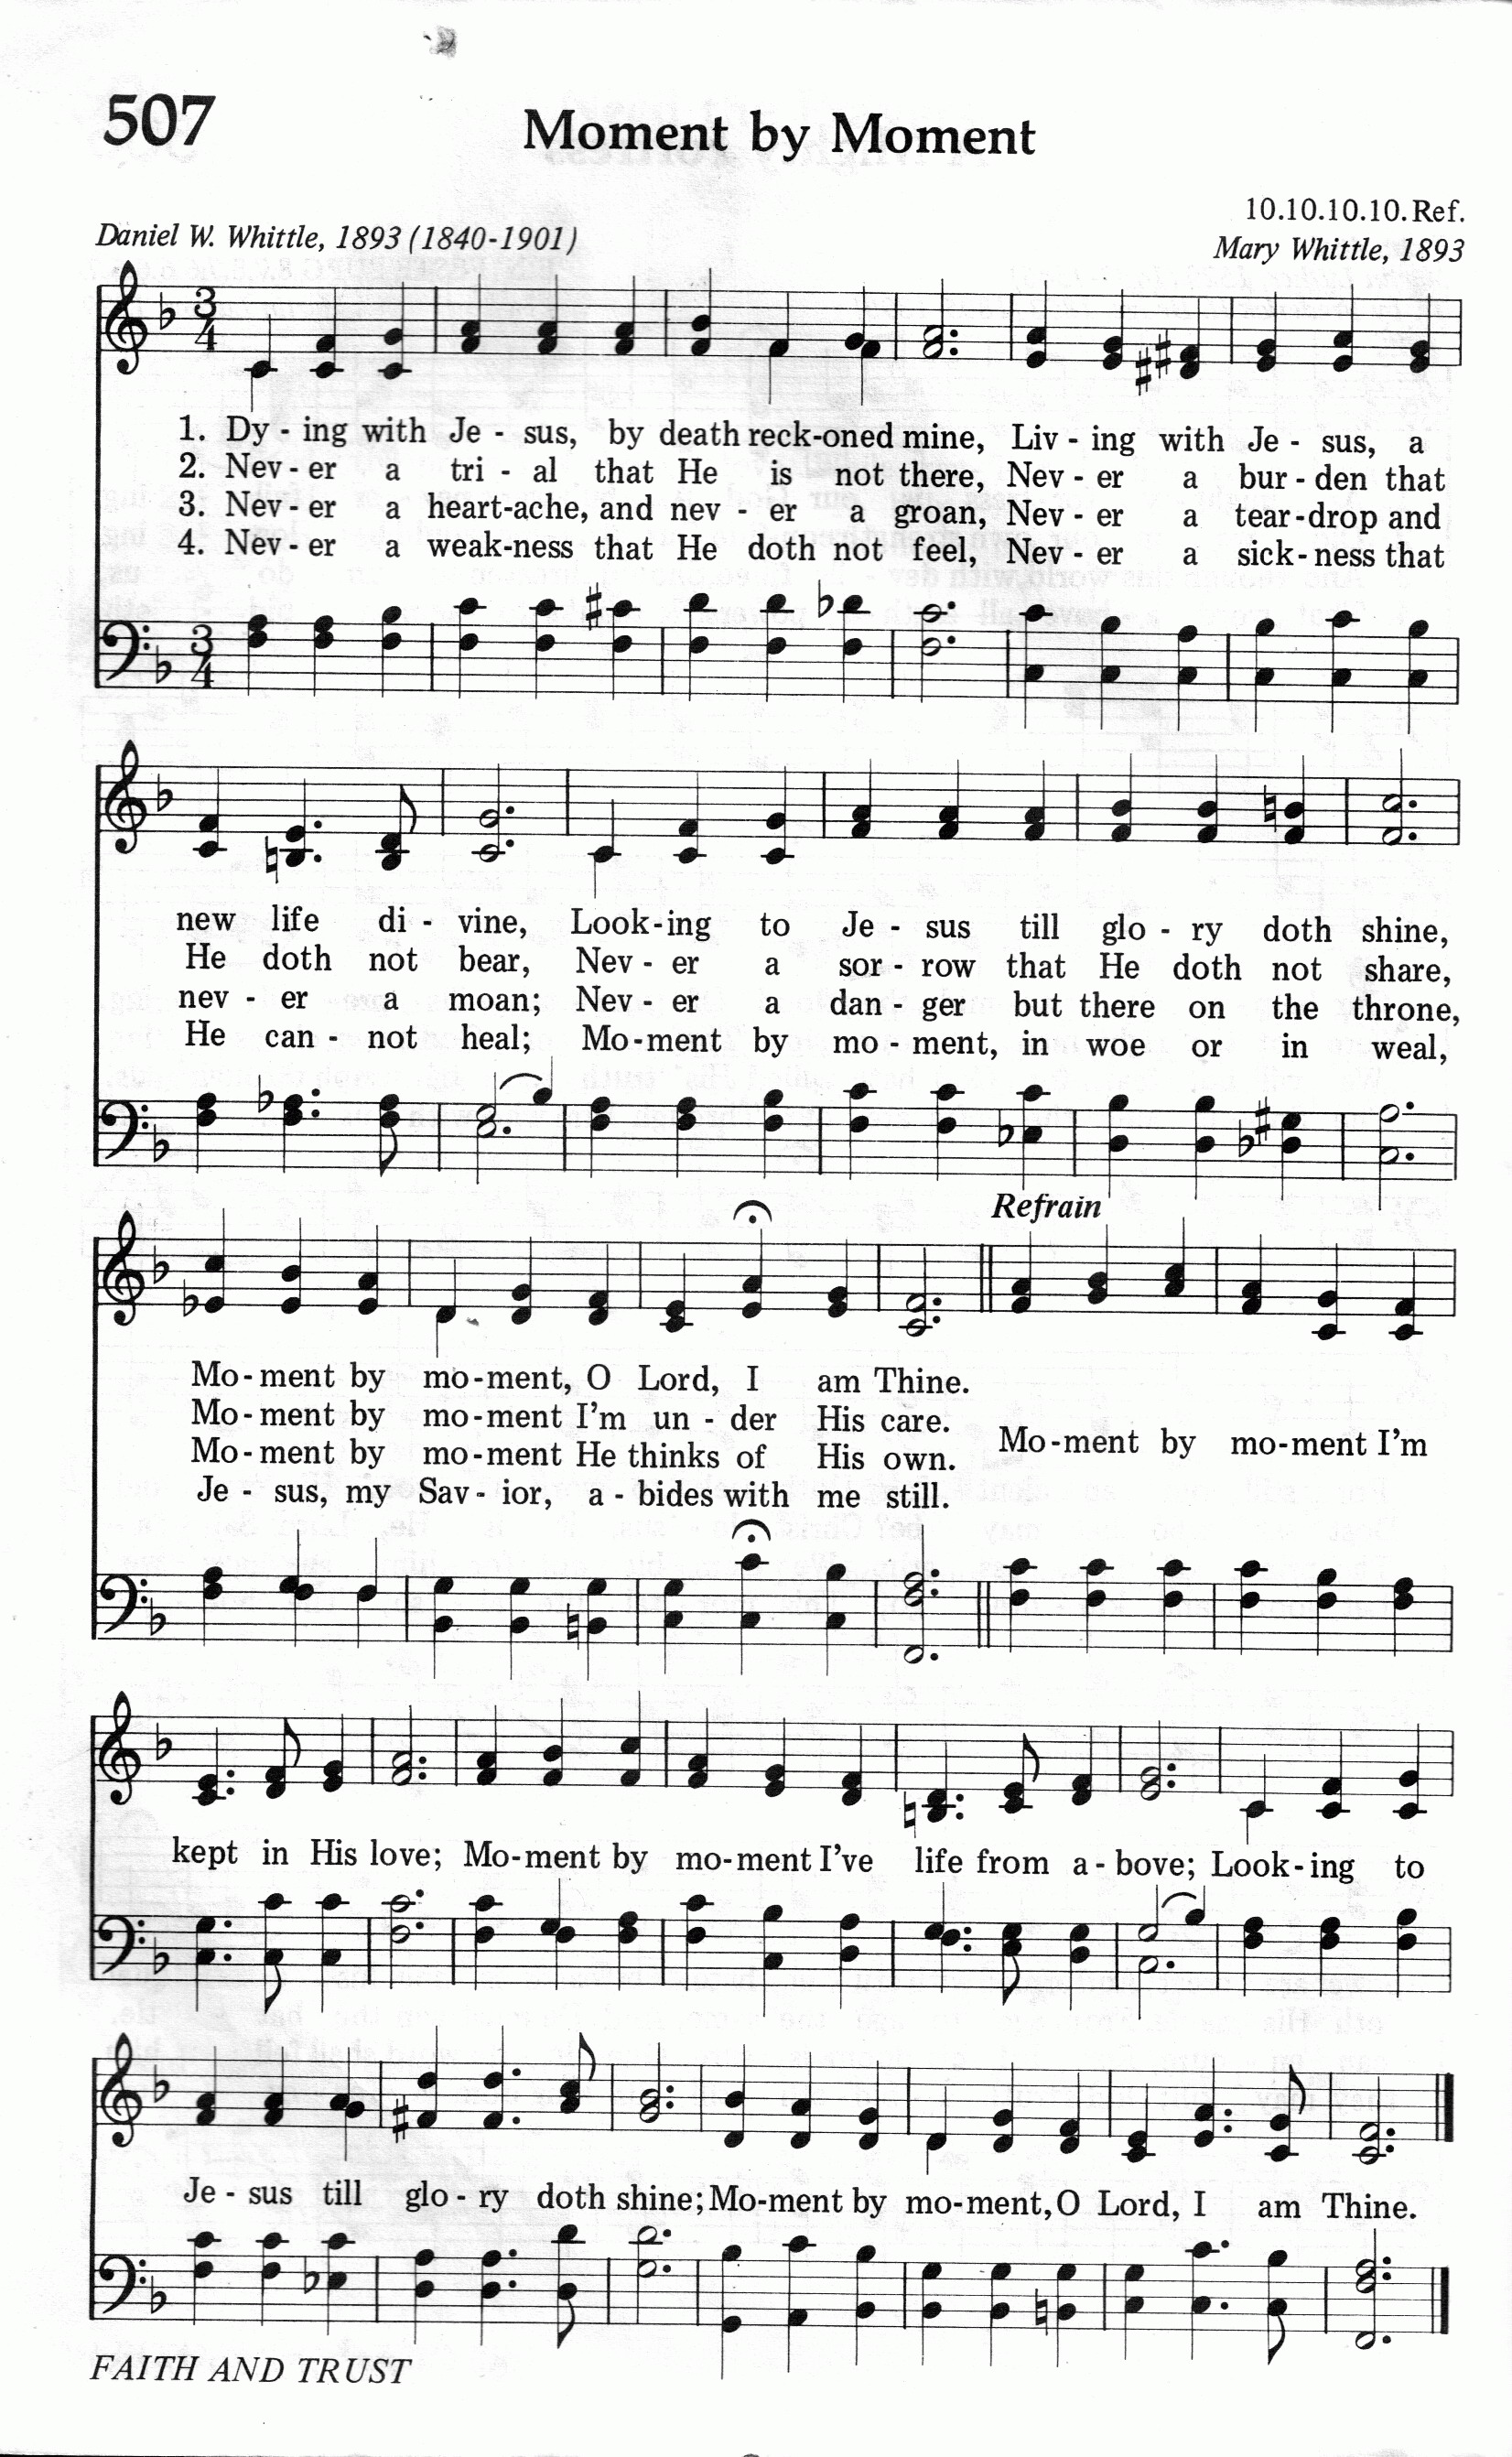 508.Anywhere With Jesus-695HYMN